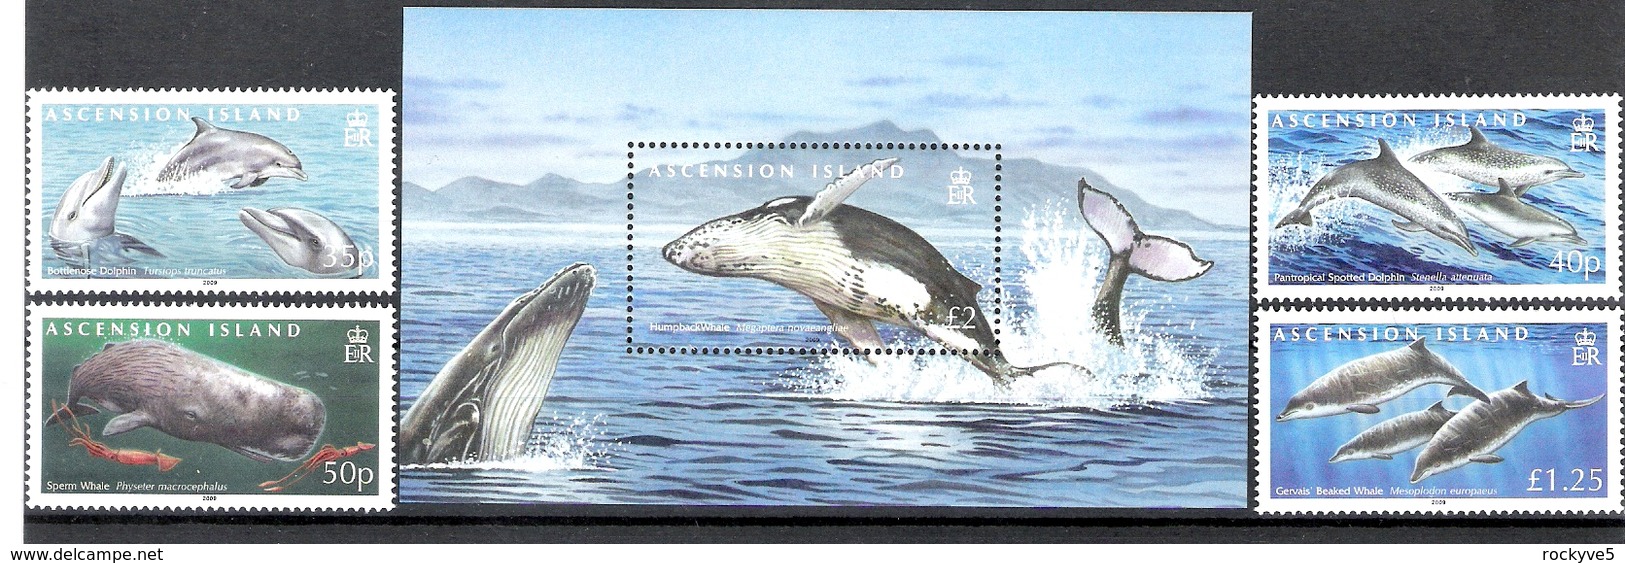 Ascension Island 2009 Whales & Dolphins + MS MNH CV £13.55 - Ascension